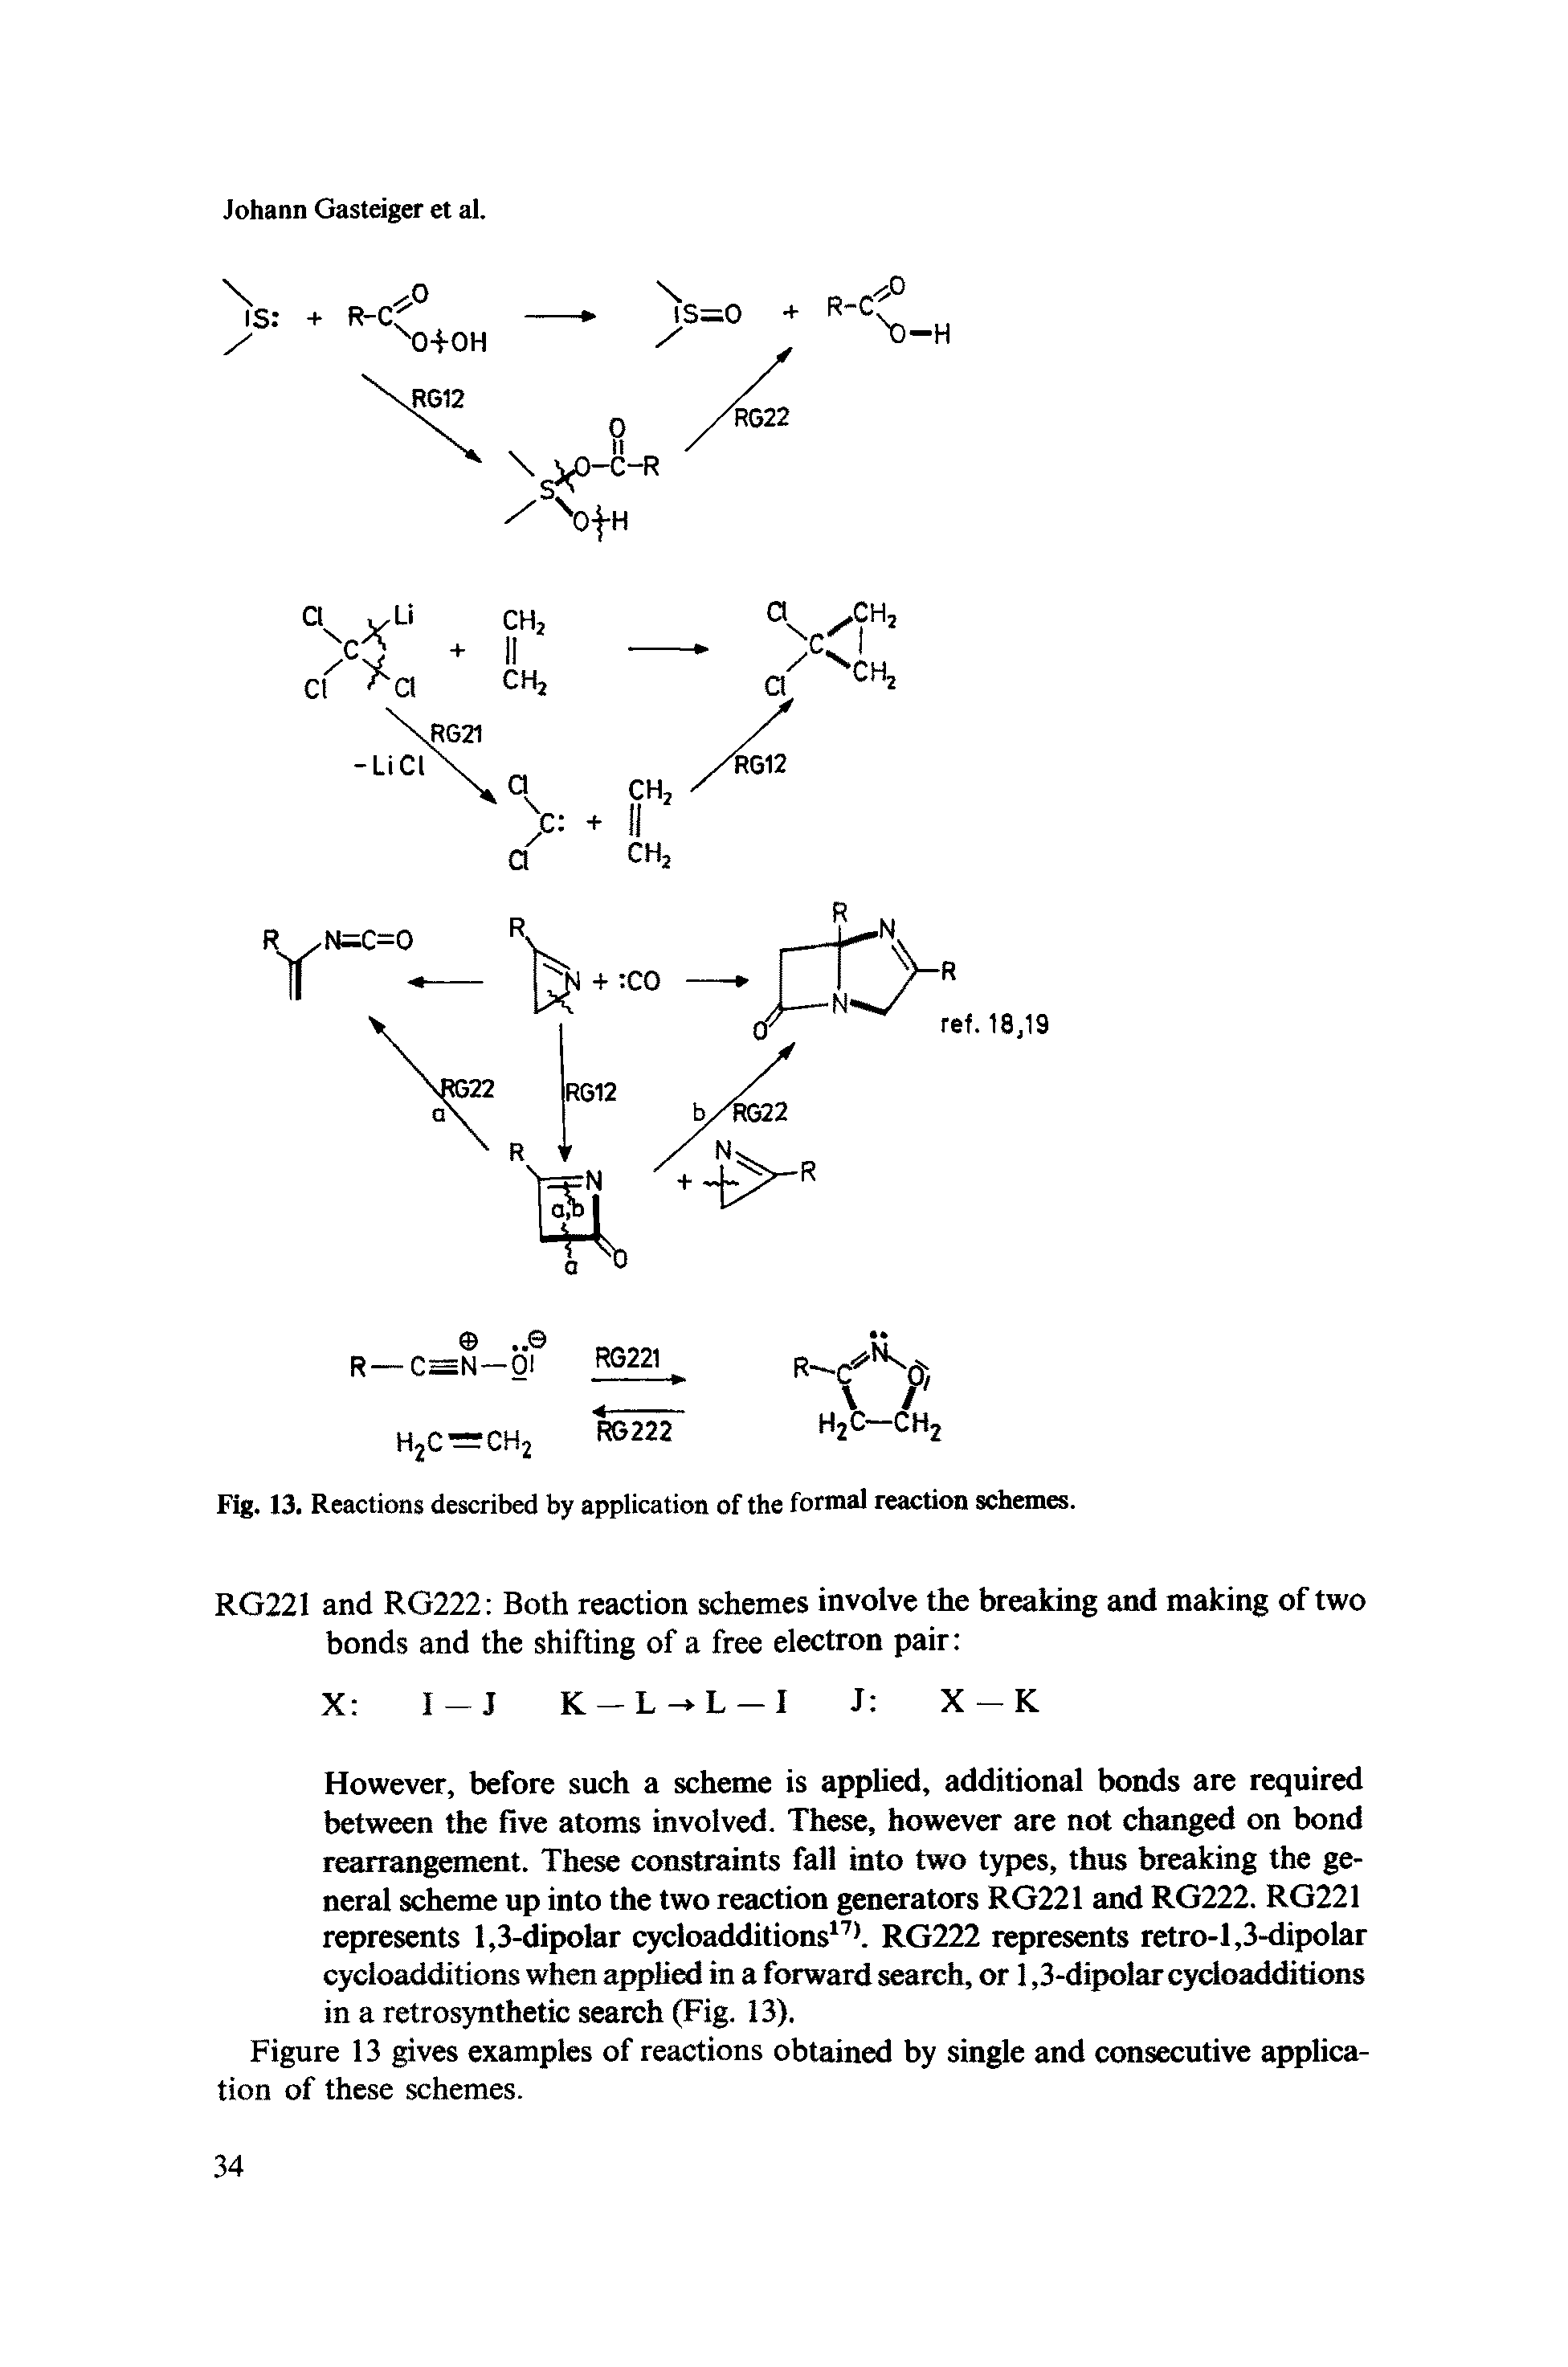 Fig. 13. Reactions described by application of the formal reaction schemes.